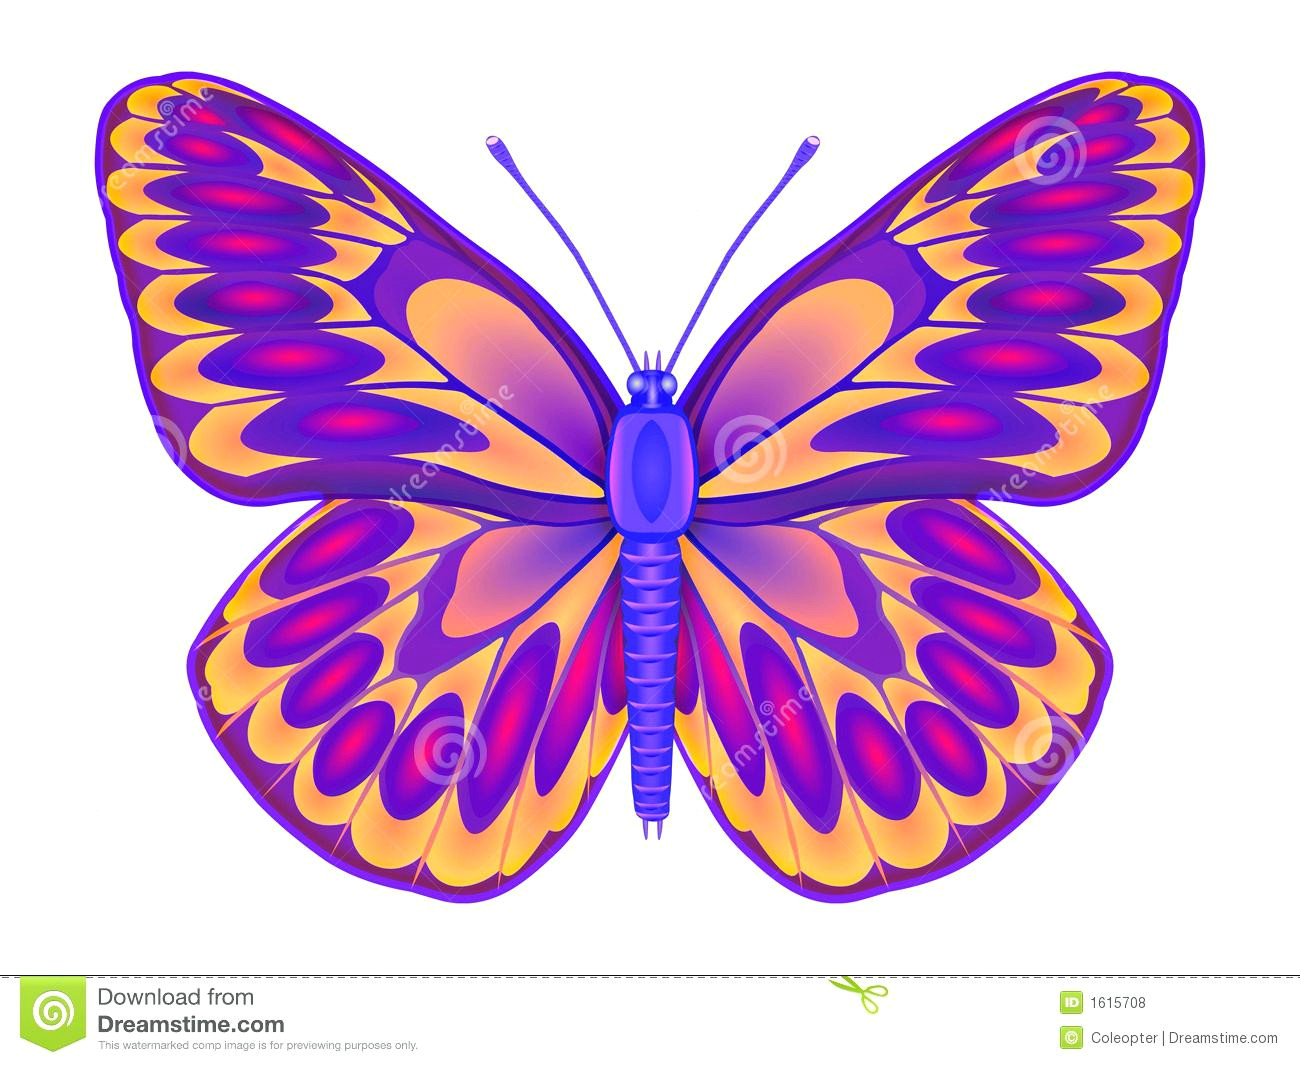 Easy to Draw butterfly Step by Step Coloring Pages Splendiy Pictures to Color Image